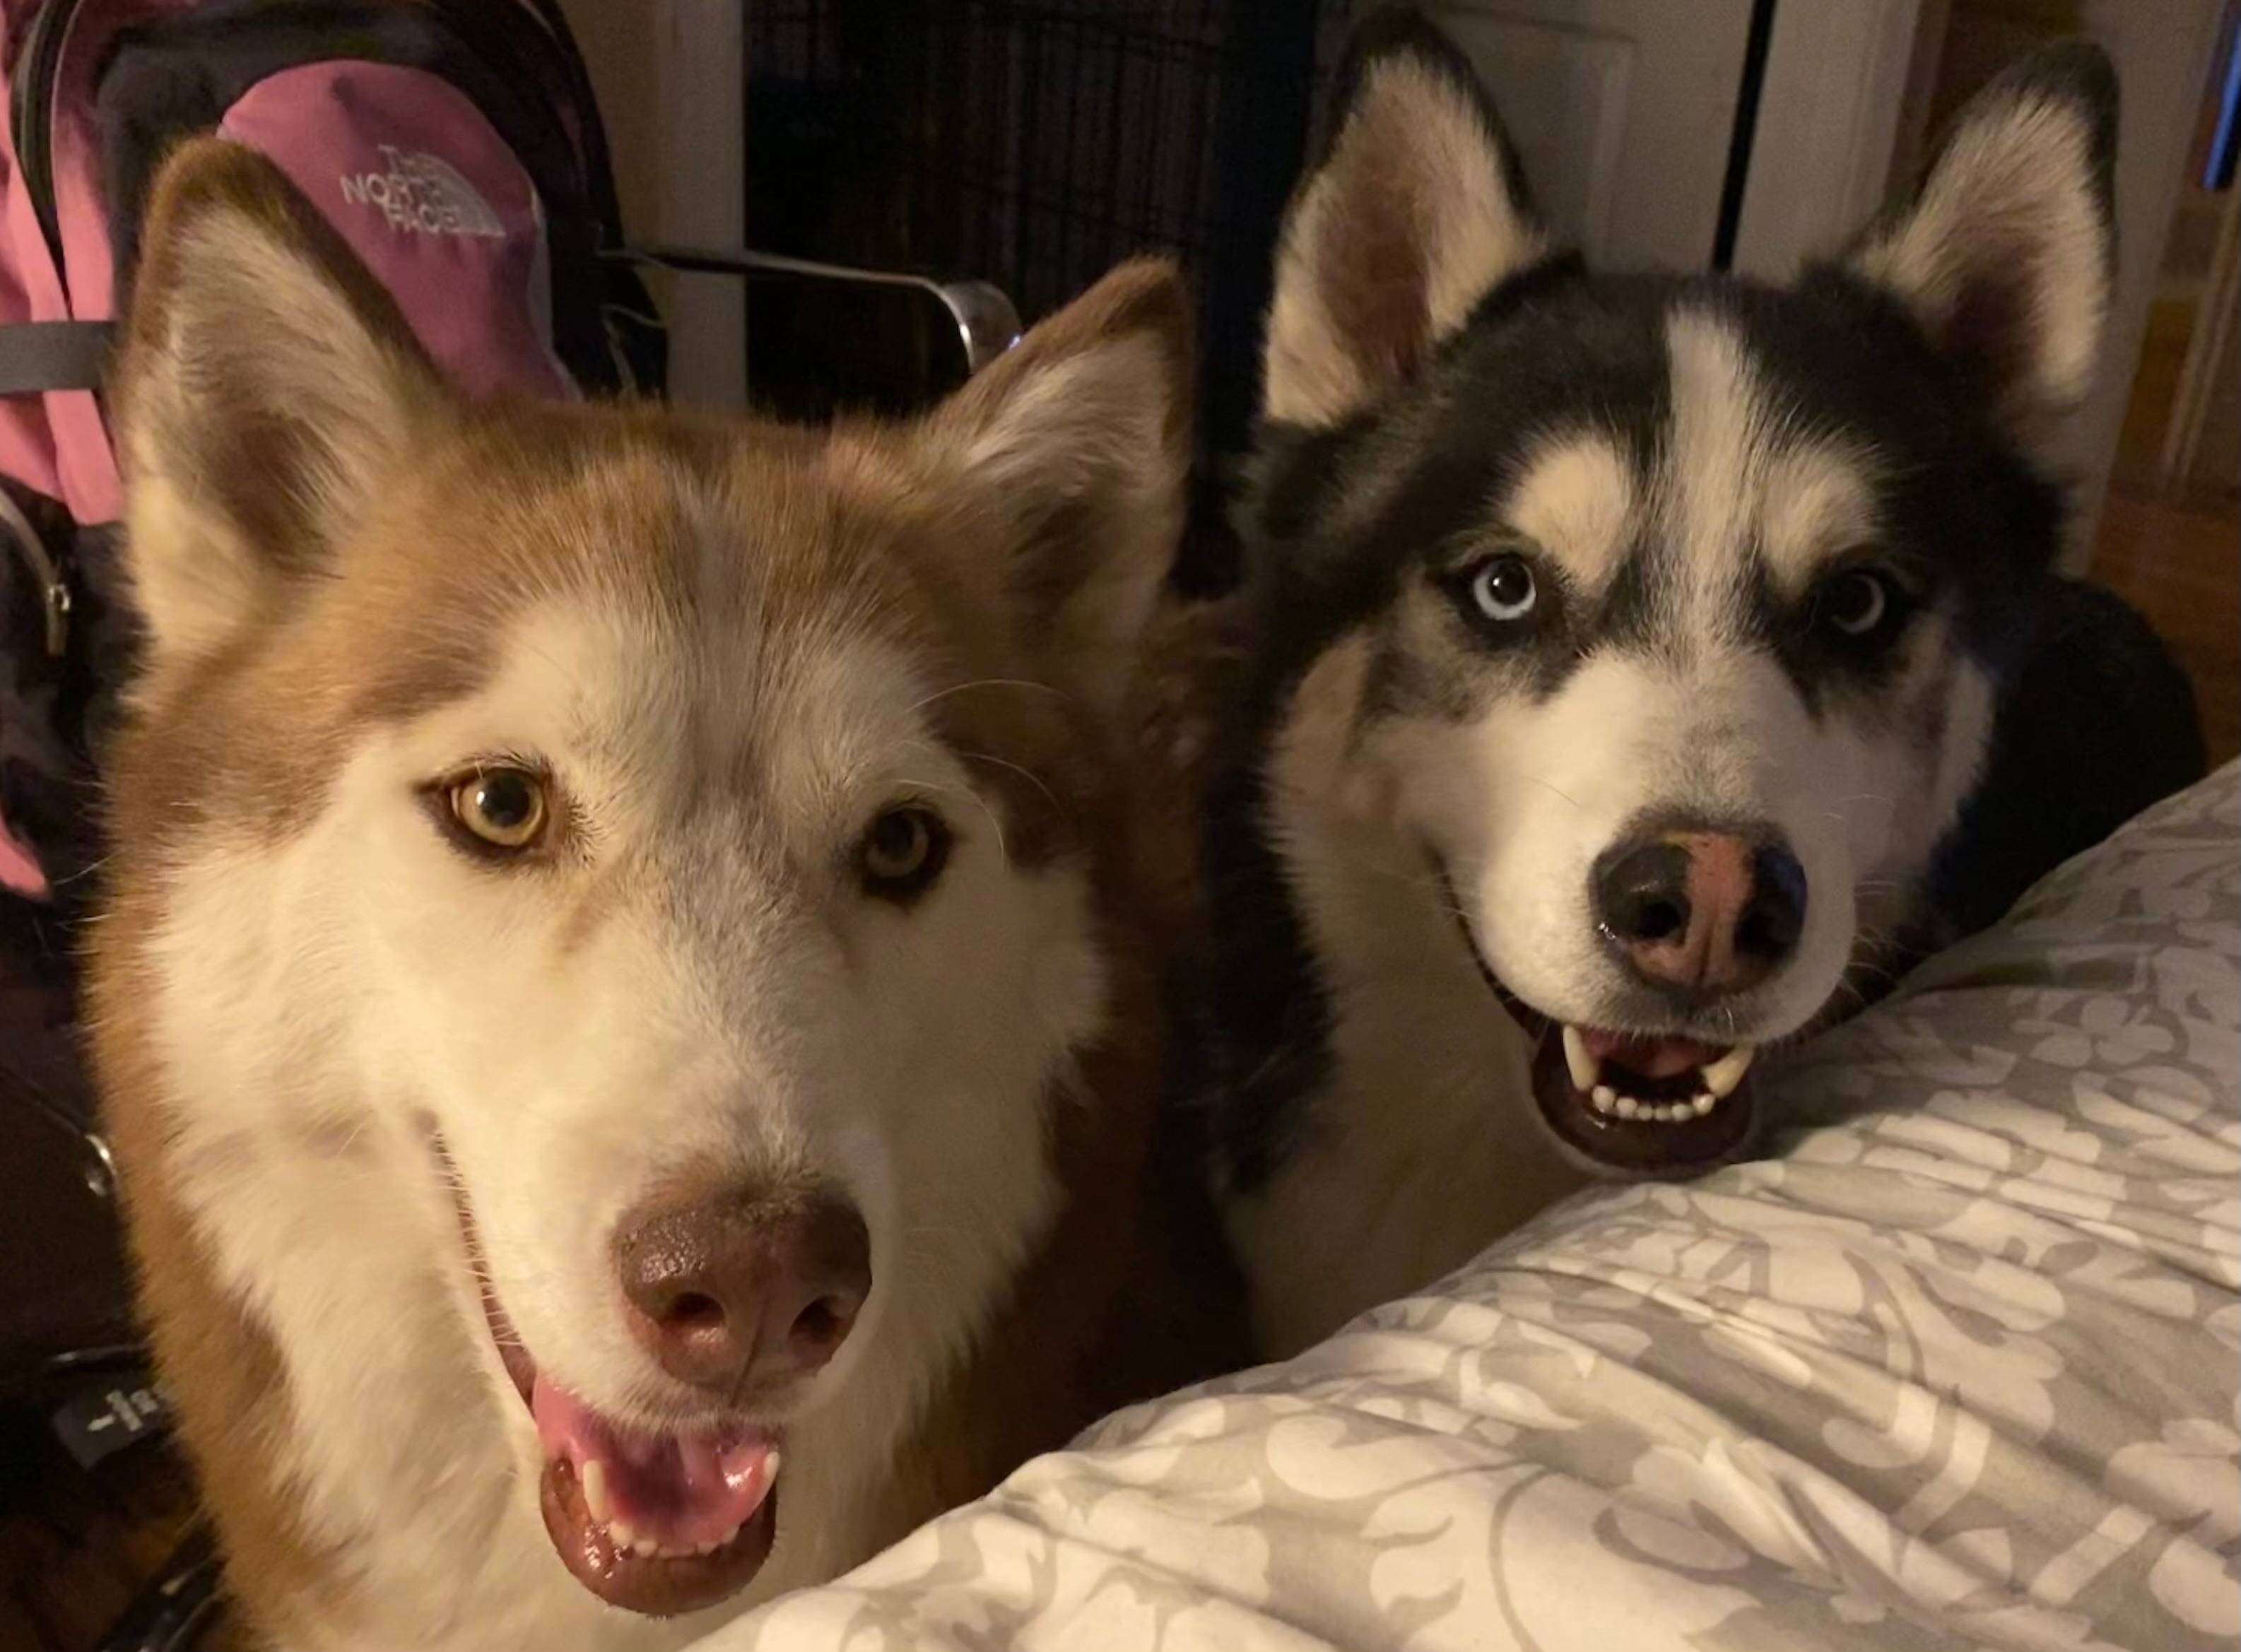 The boys before bedtime waiting for people snacks